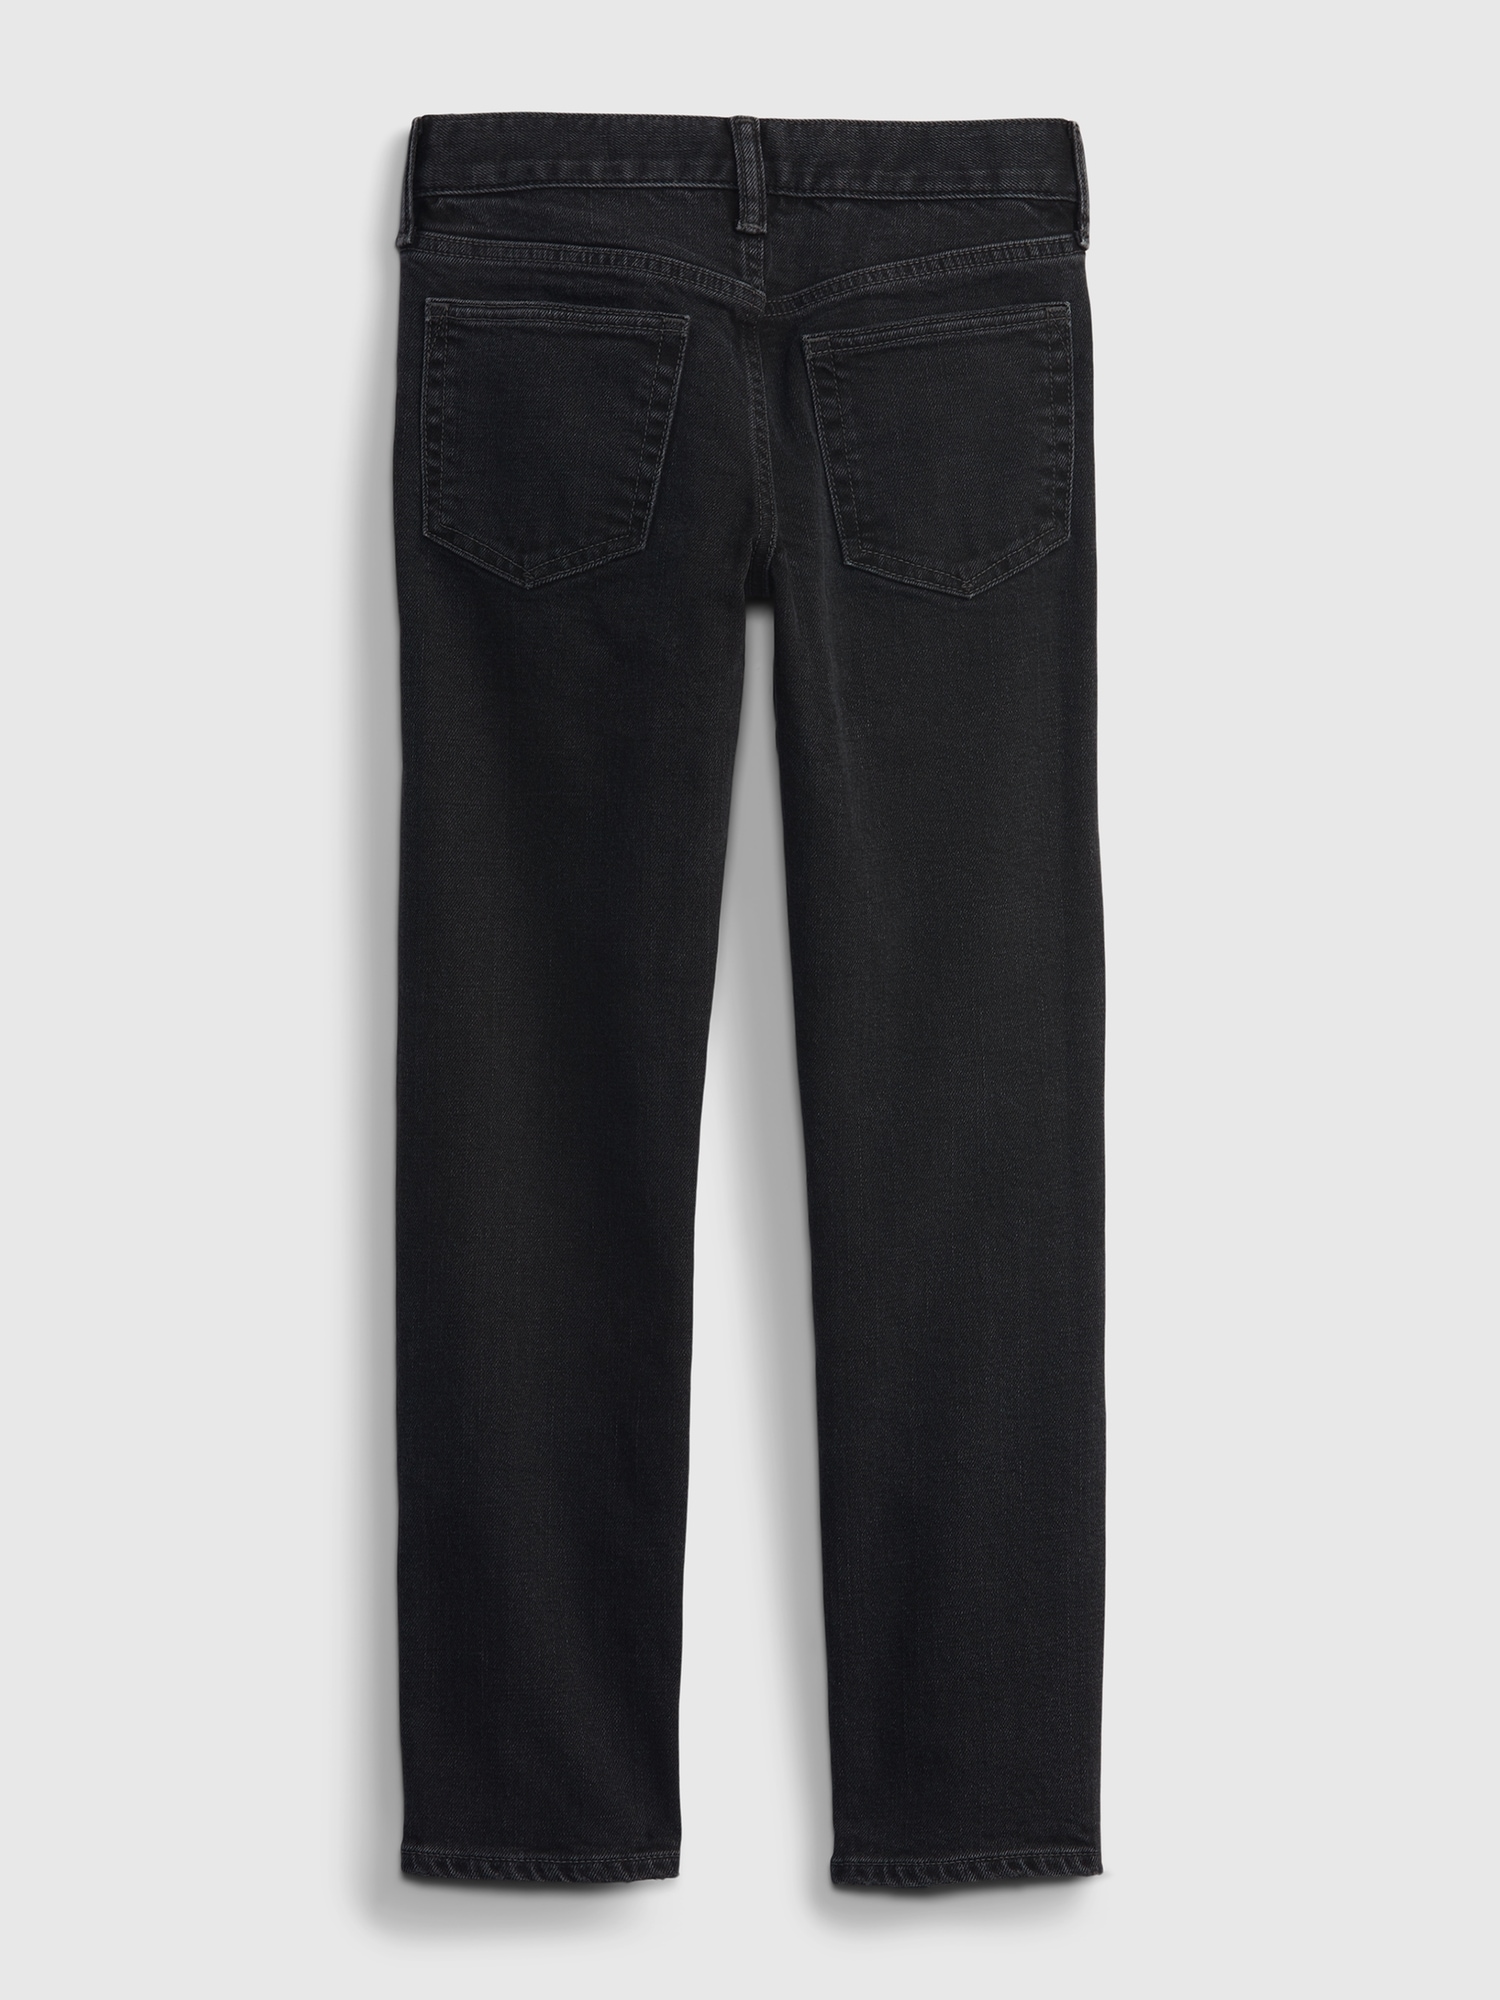 Kids Slim Jeans with Washwell | Gap